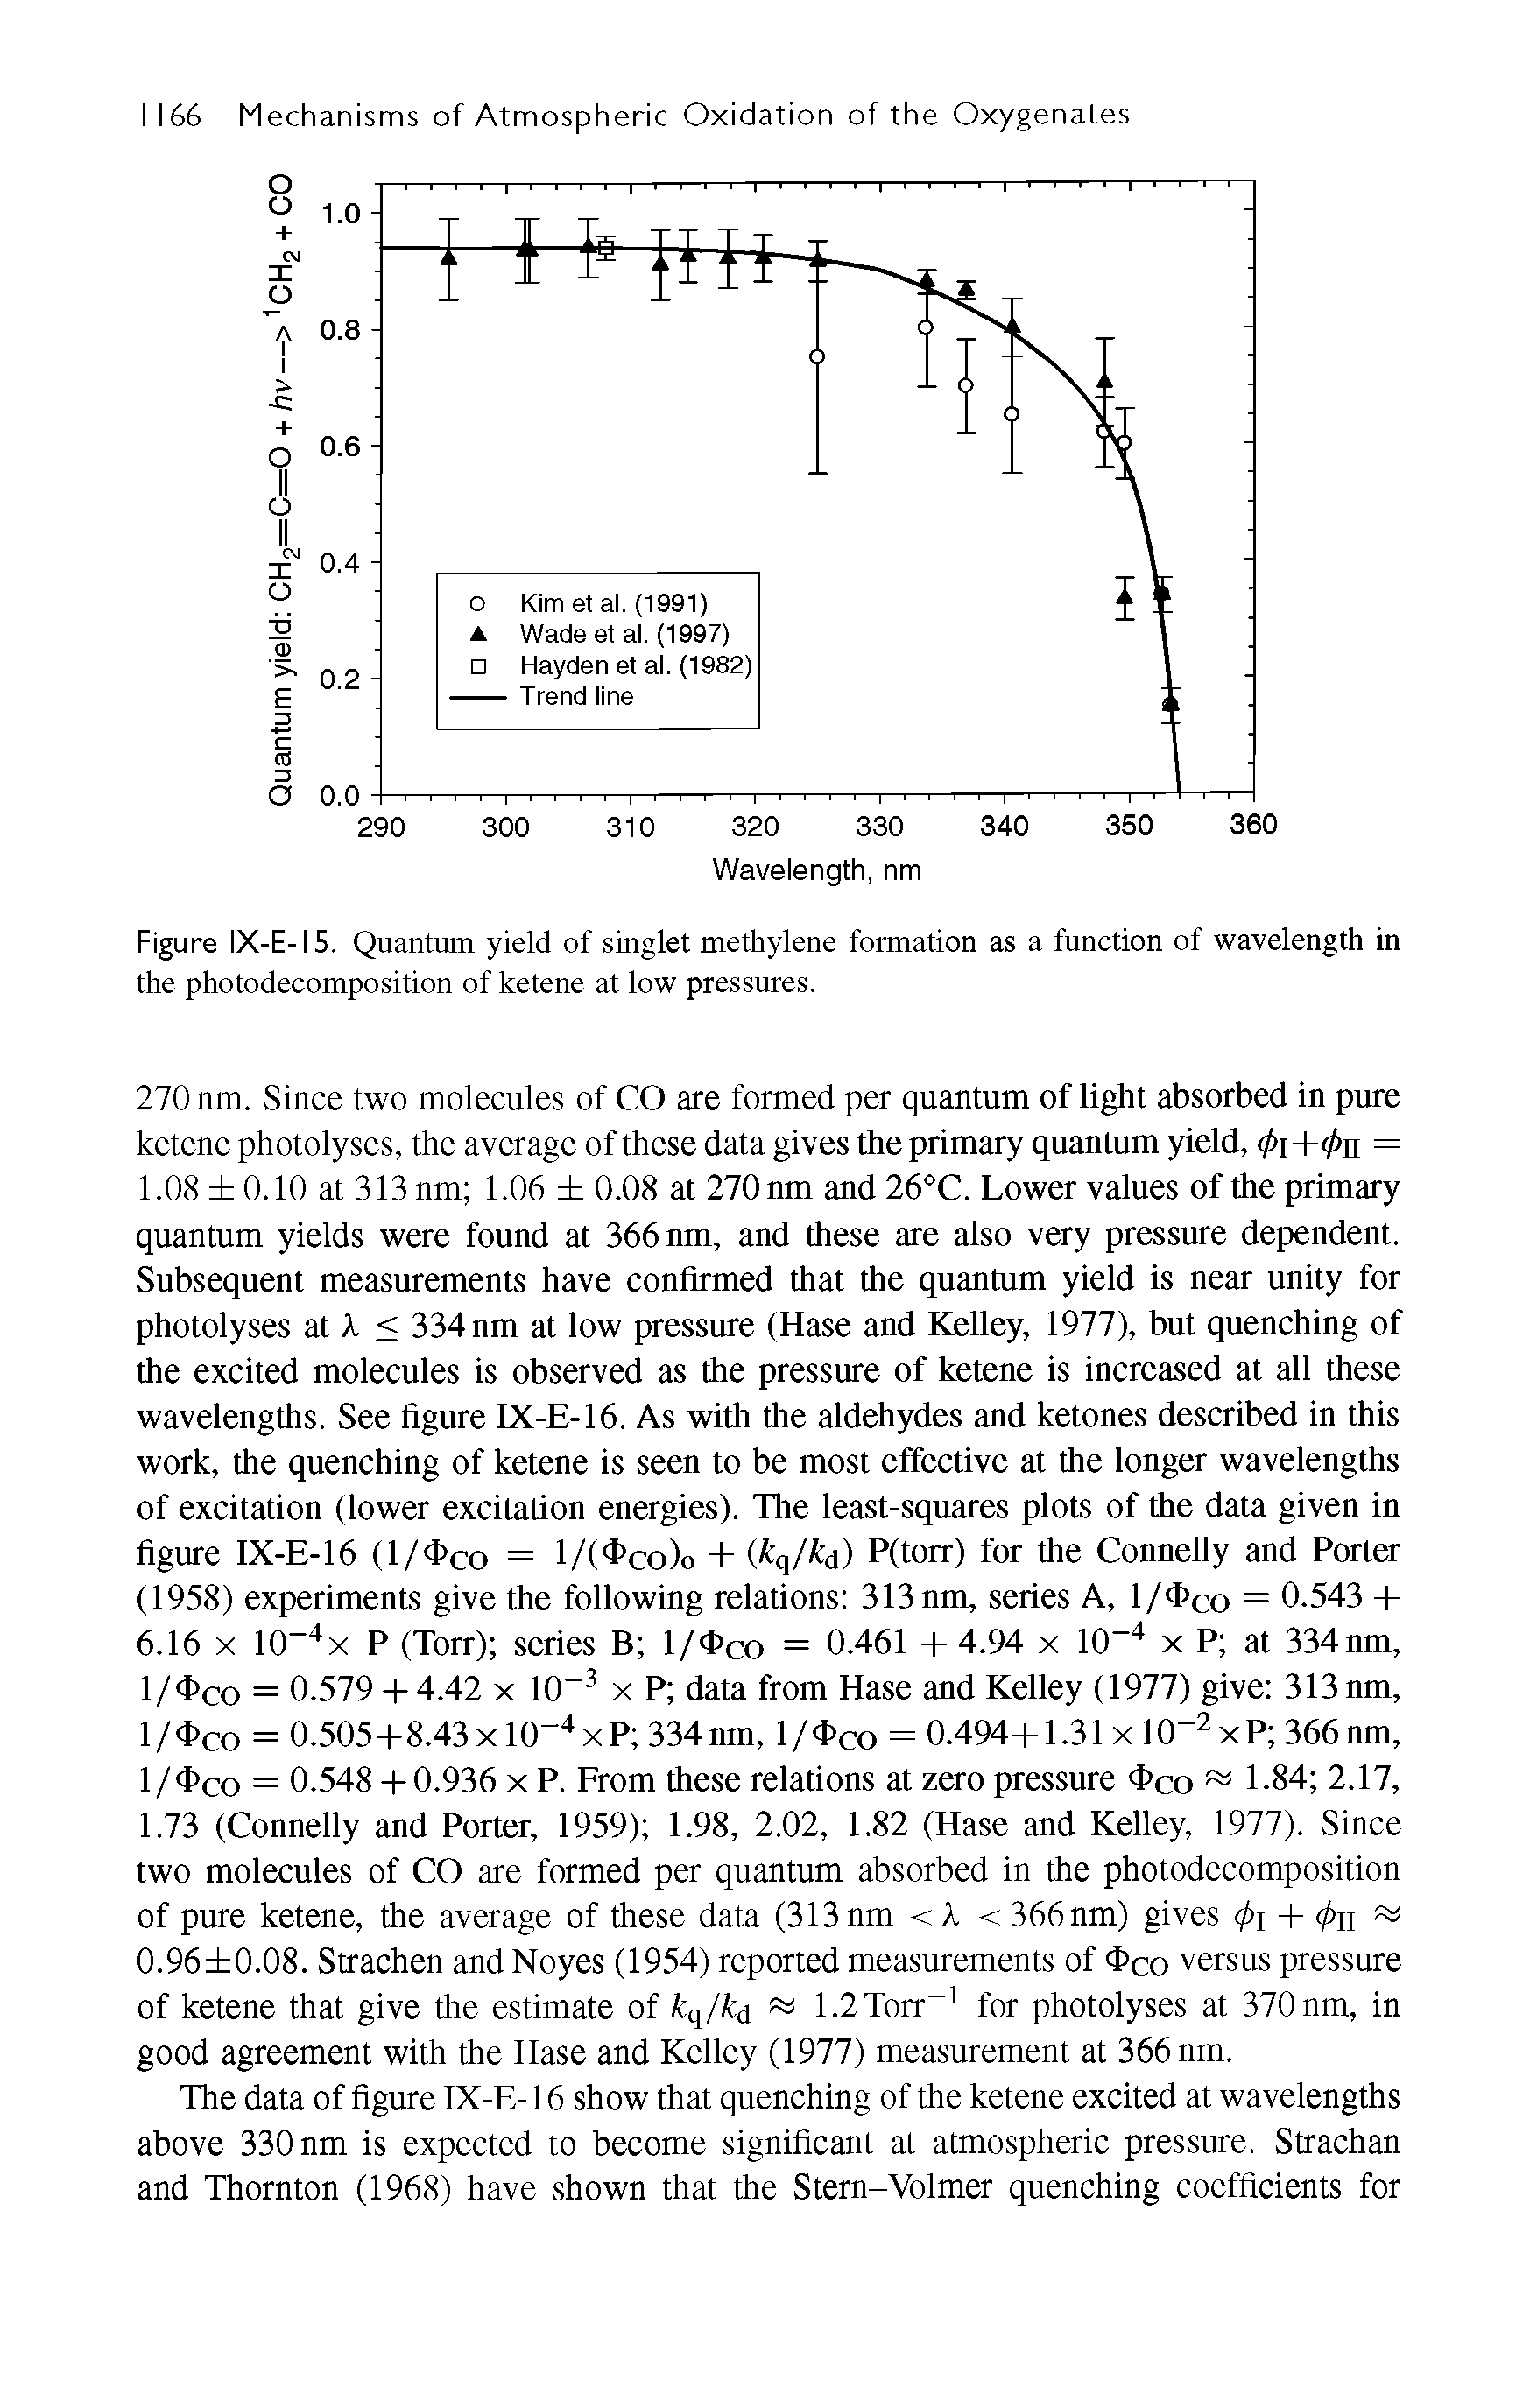 Figure IX-E-15. Quantum yield of singlet methylene formation as a function of wavelength in the photodecomposition of ketene at low pressures.